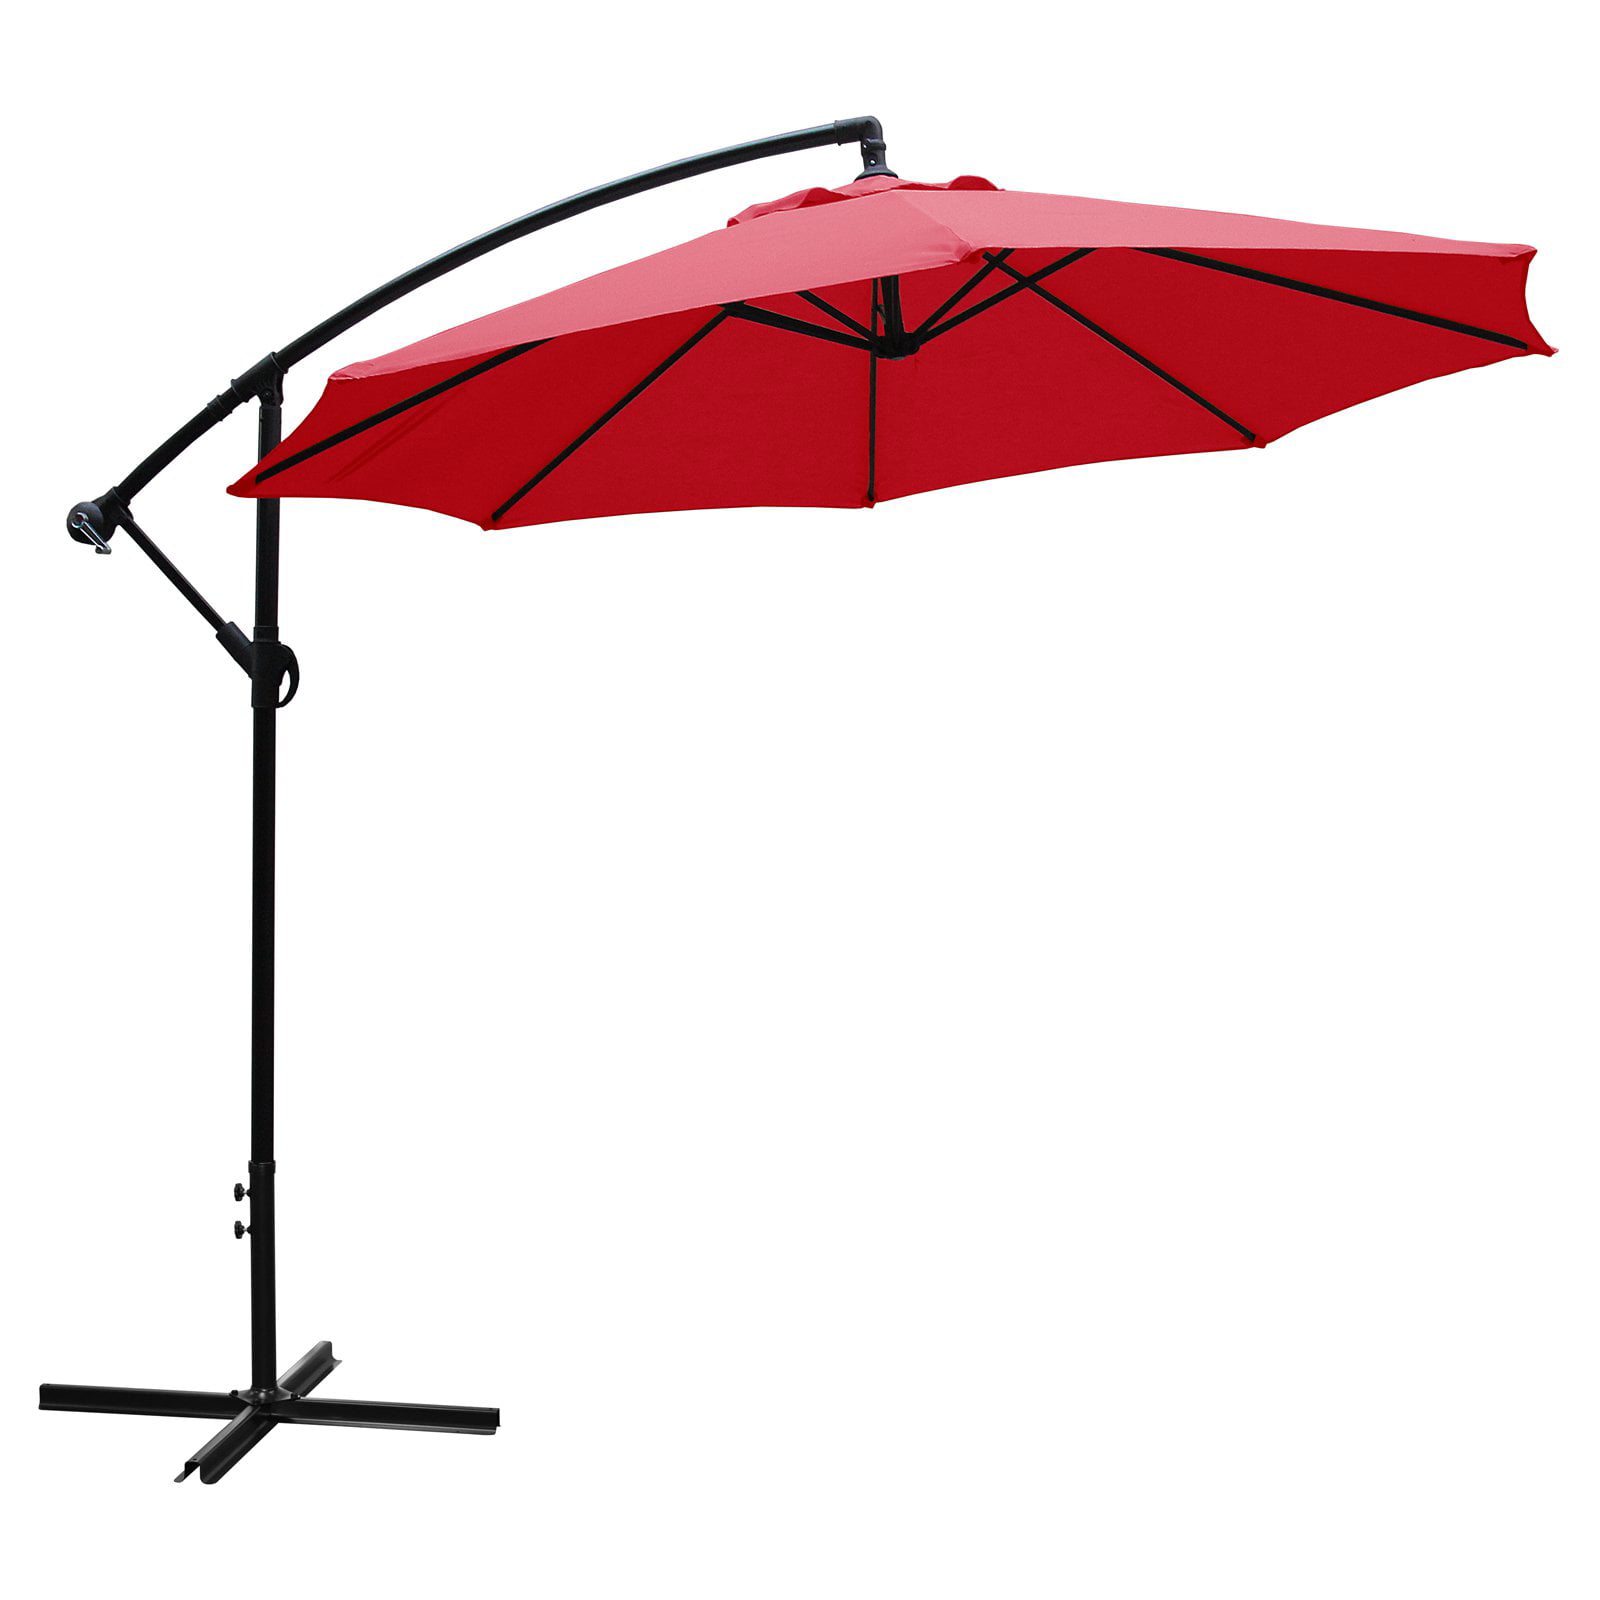 12 Ribs Windproof Travel Umbrella with Canopy Auto Open//Close A4C4